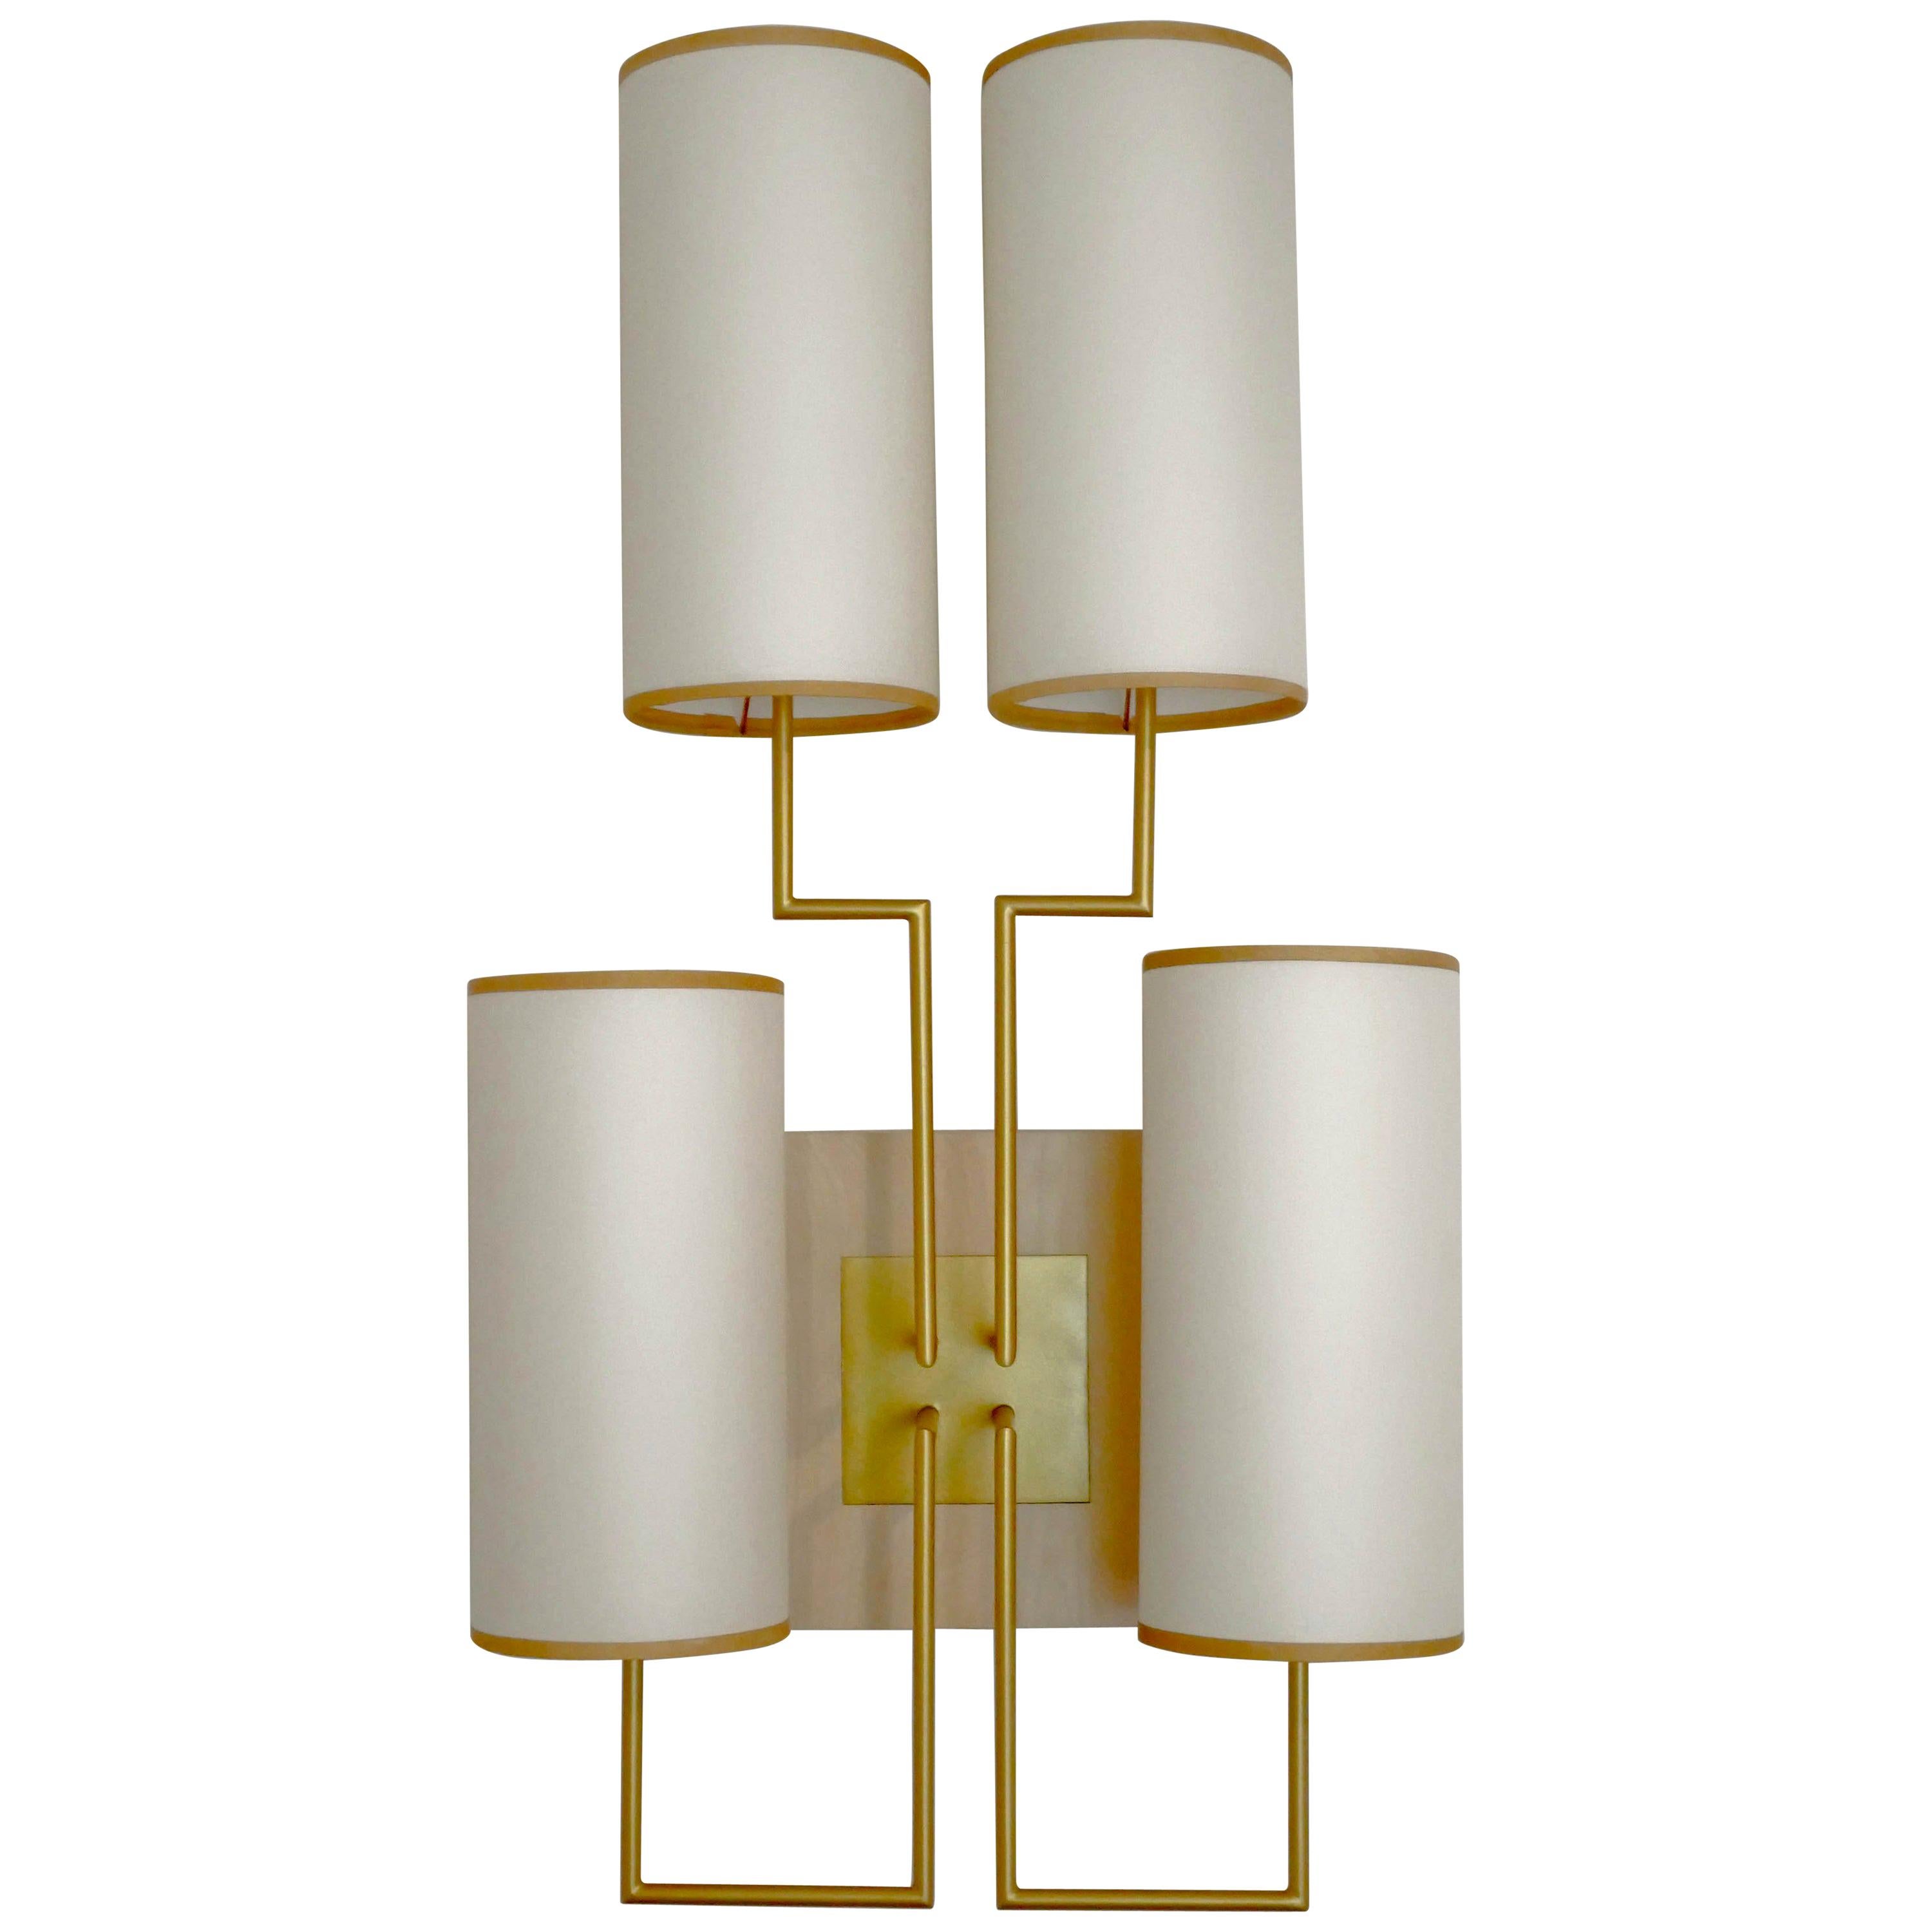 Wall Lamp Sconce in Gold Patina and White Lamp Shades